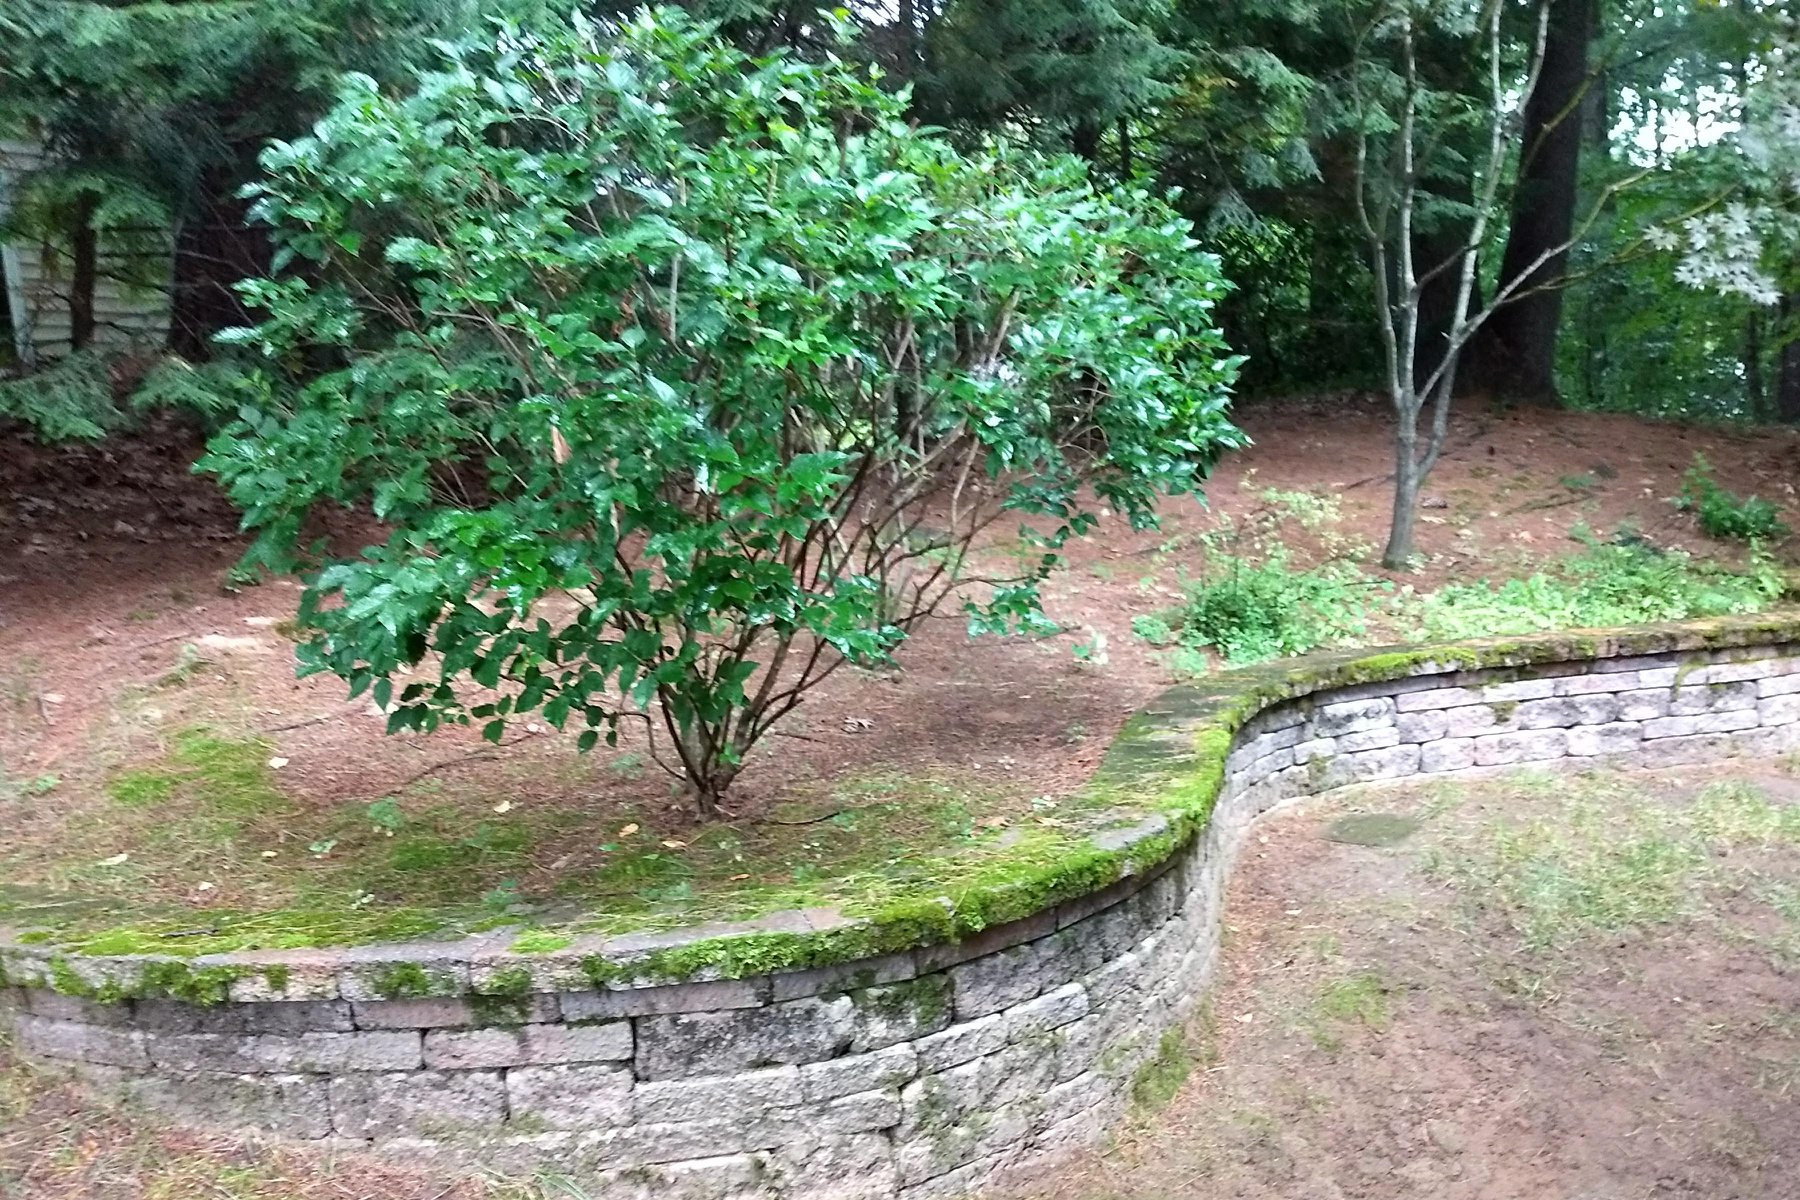 Thumbnail of an overgrown plant bed with no mulch